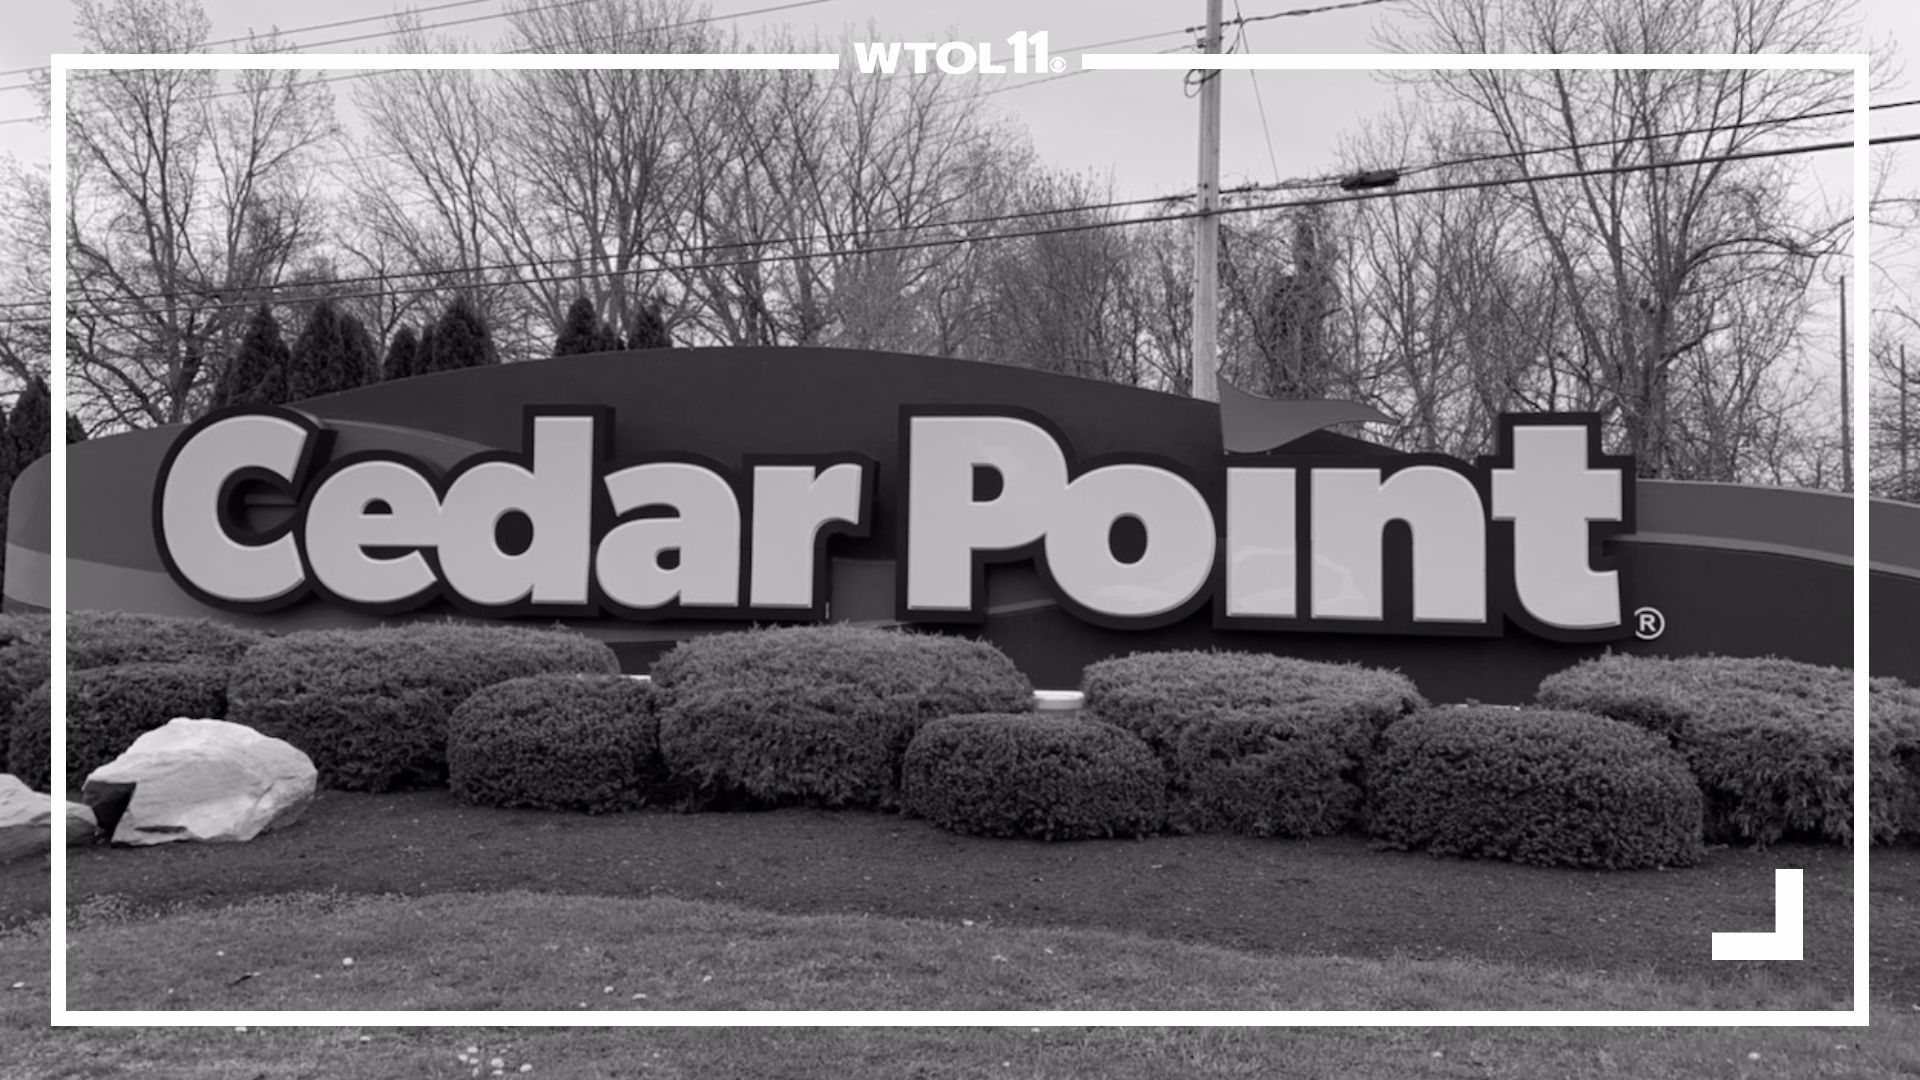 Women who tell of being assaulted in the park's employee housing refute Cedar Point's claims of security, support.